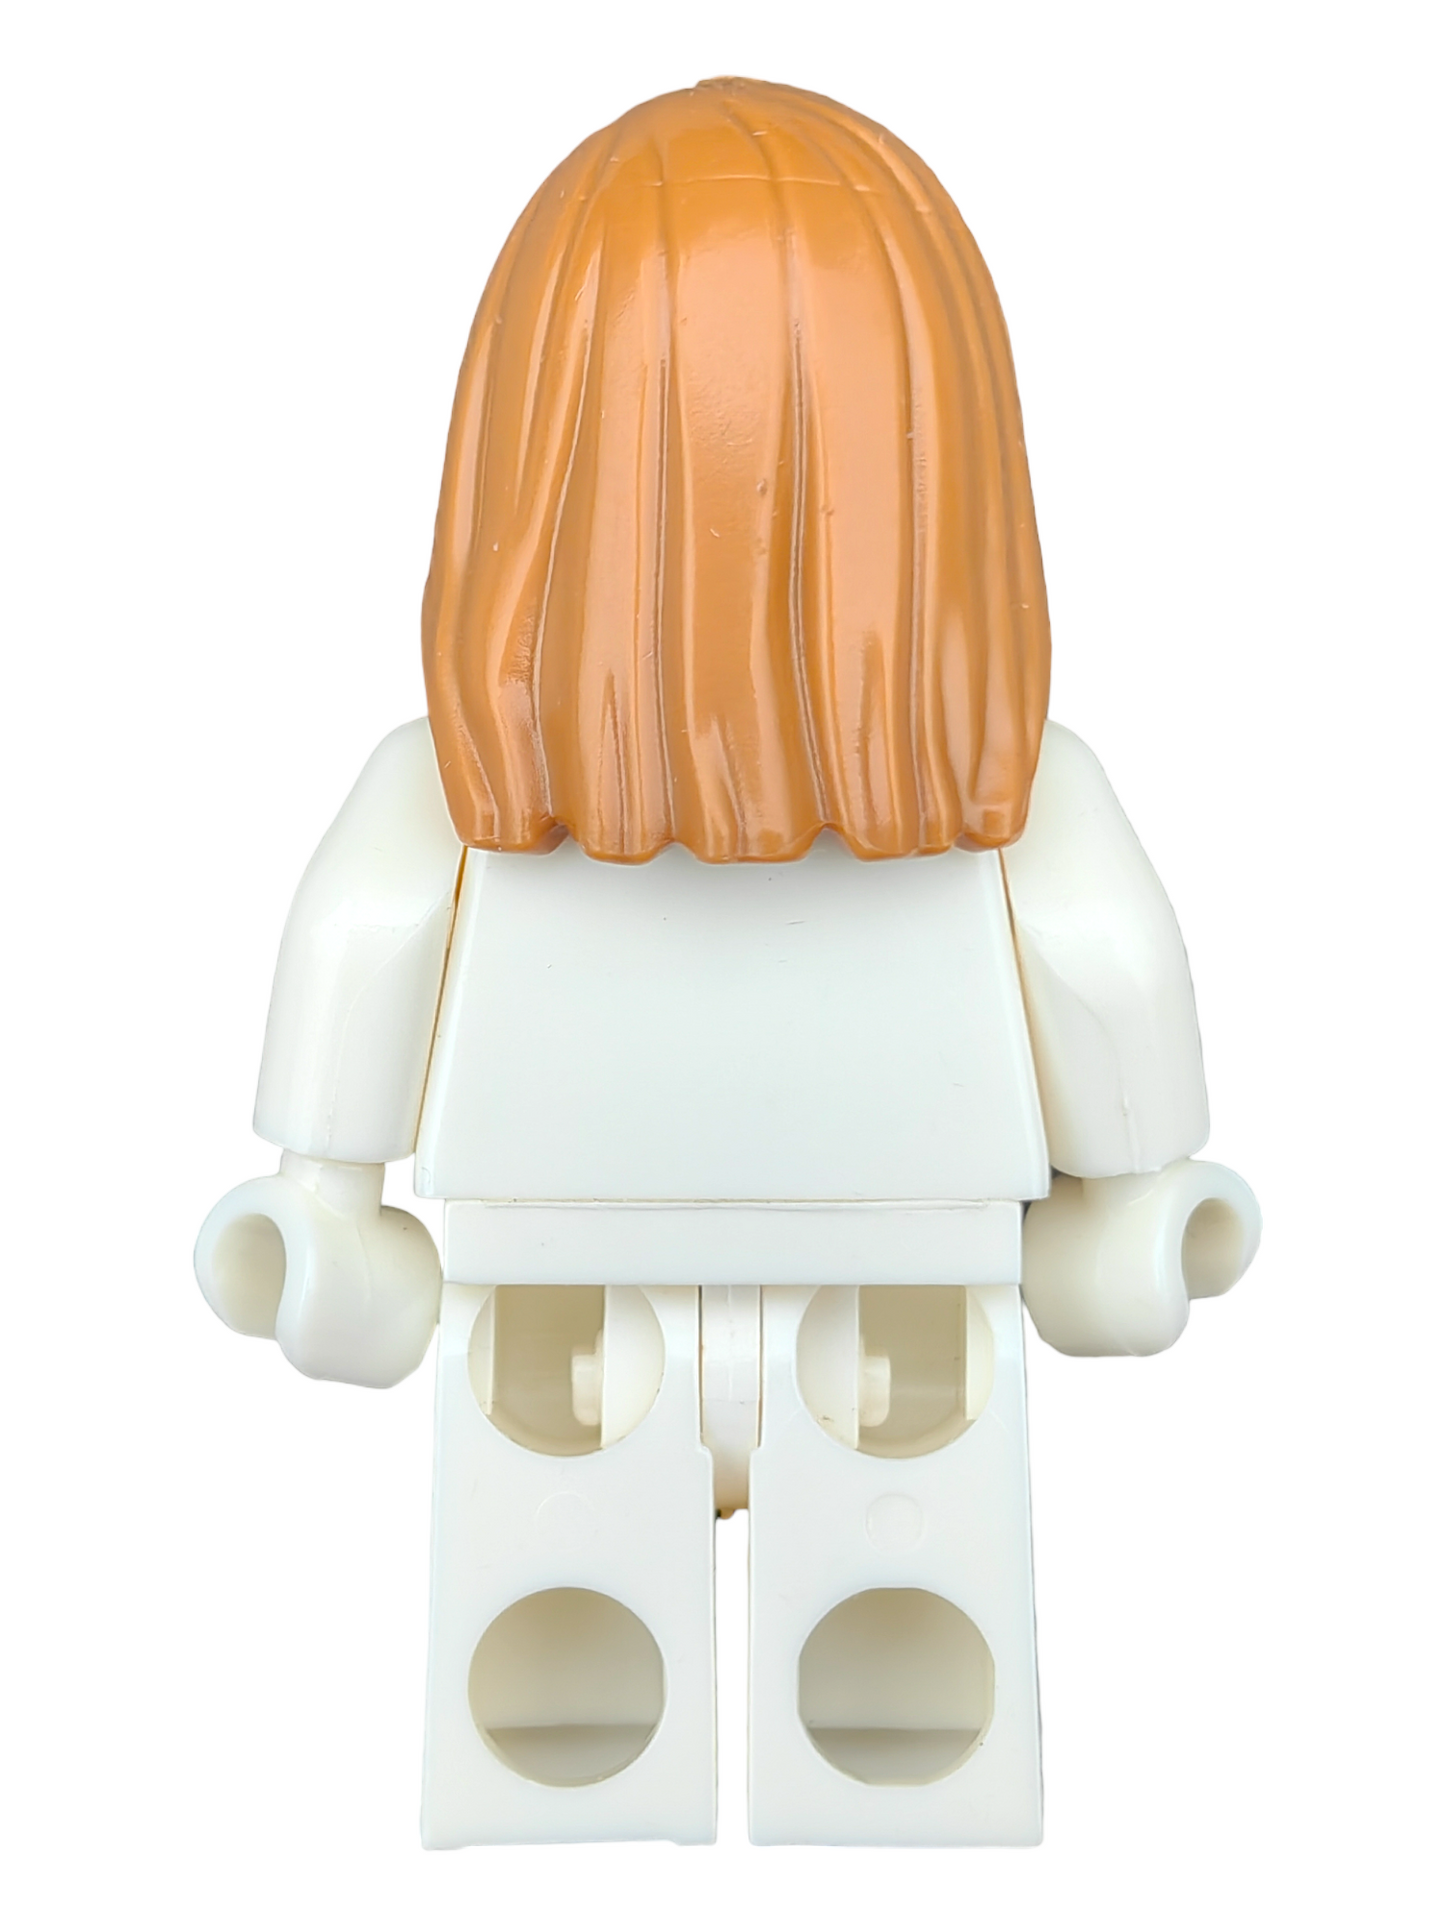 LEGO Wig, Long Straight Ginger Hair with Left Side Parting - UB1264